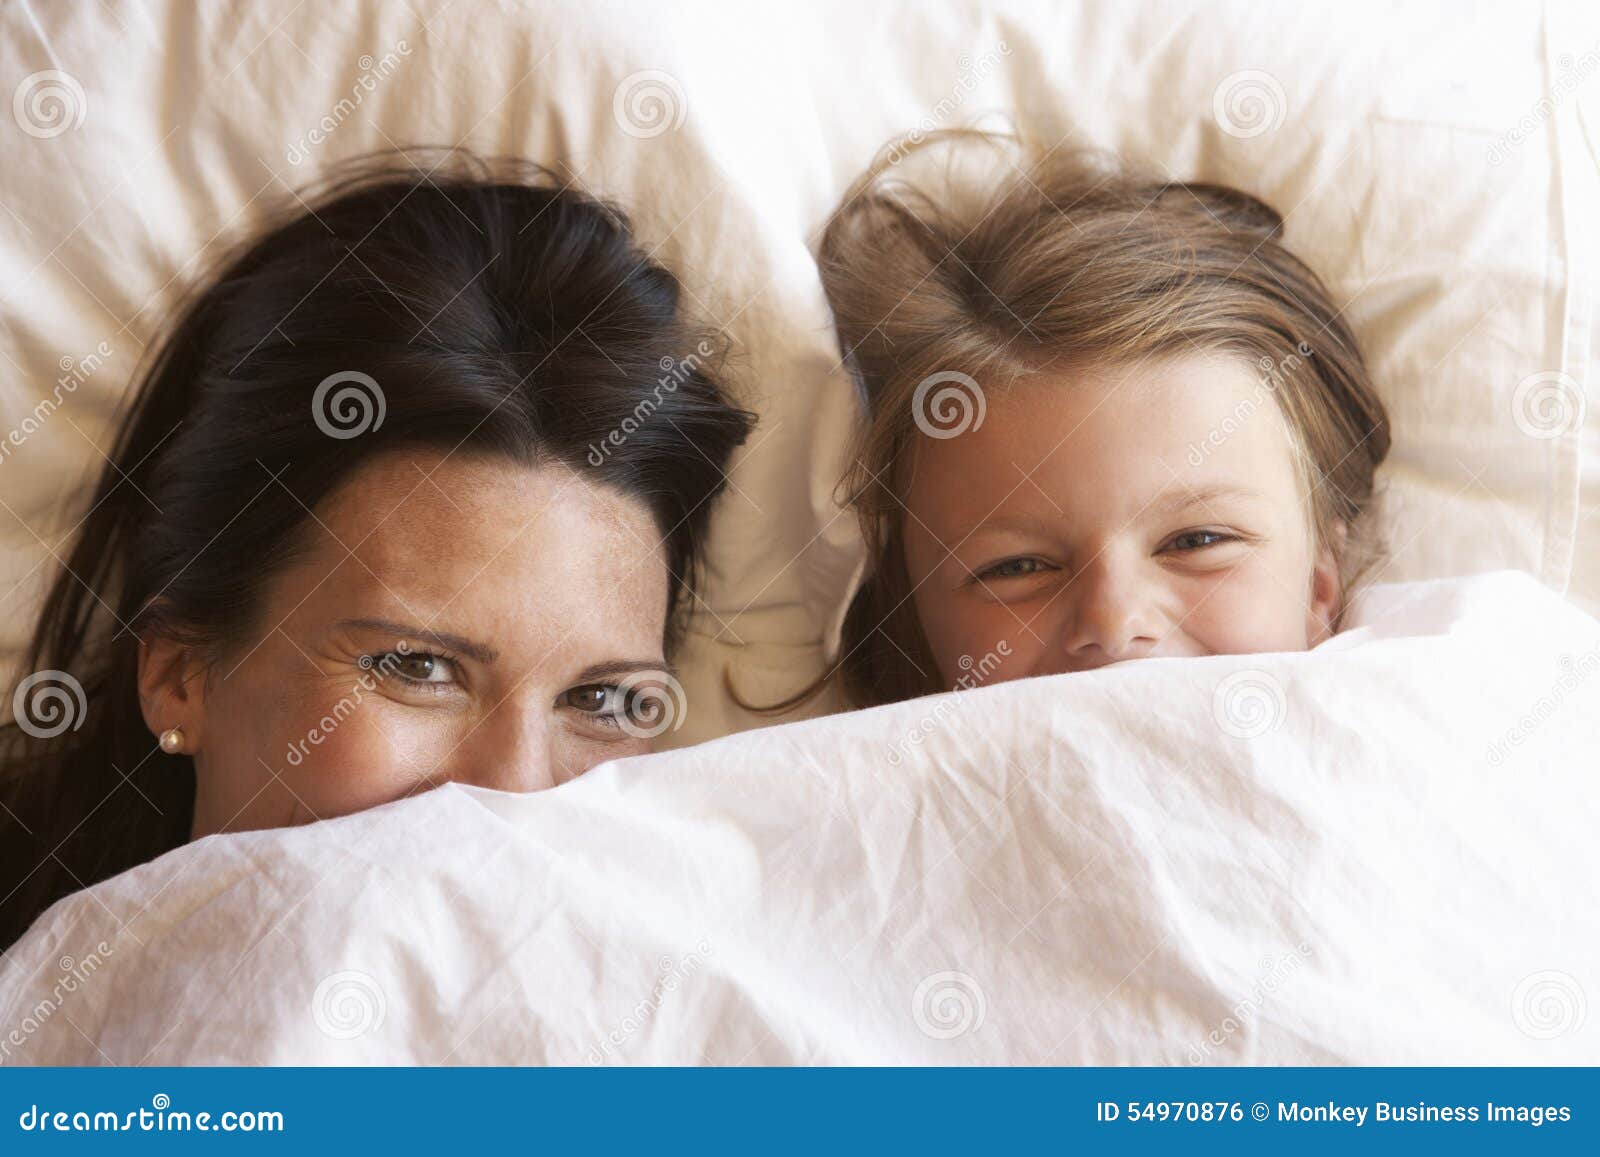 mother and daughter hiding under bedclothes